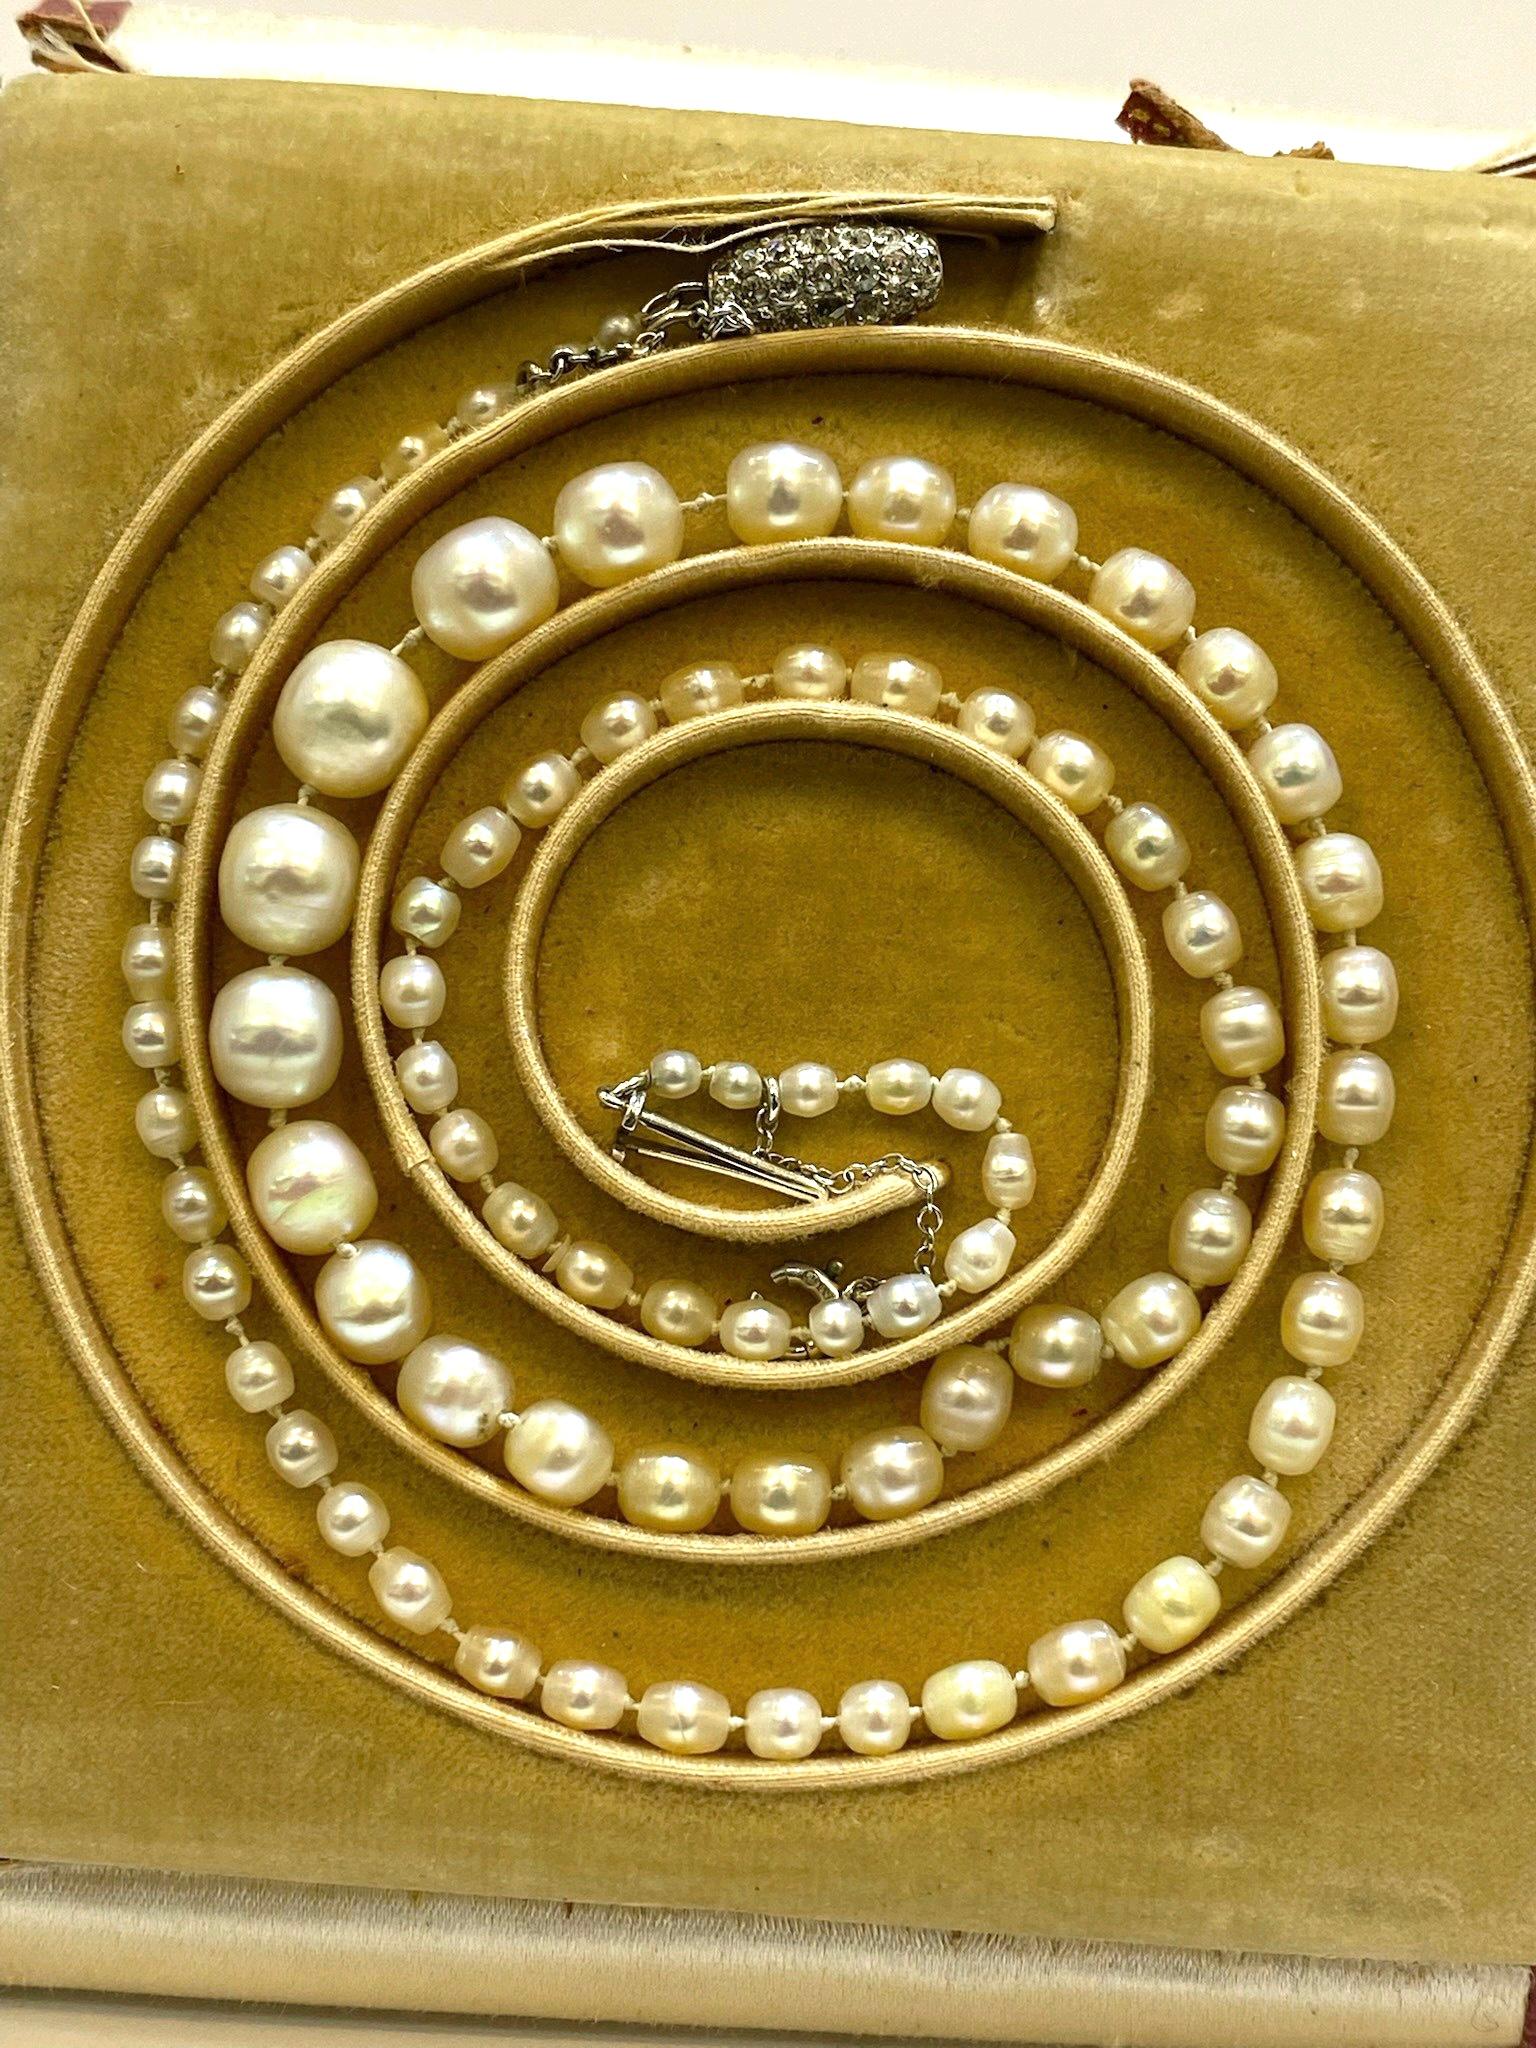 Cartier saltwater pearl necklace with original box. 85 natural Saltwater Pearls set together by a 56 round cut diamond set screw closure. 

This marvelous necklace is a true rarity. Dating back over 100 years and made by the famed French jeweler,